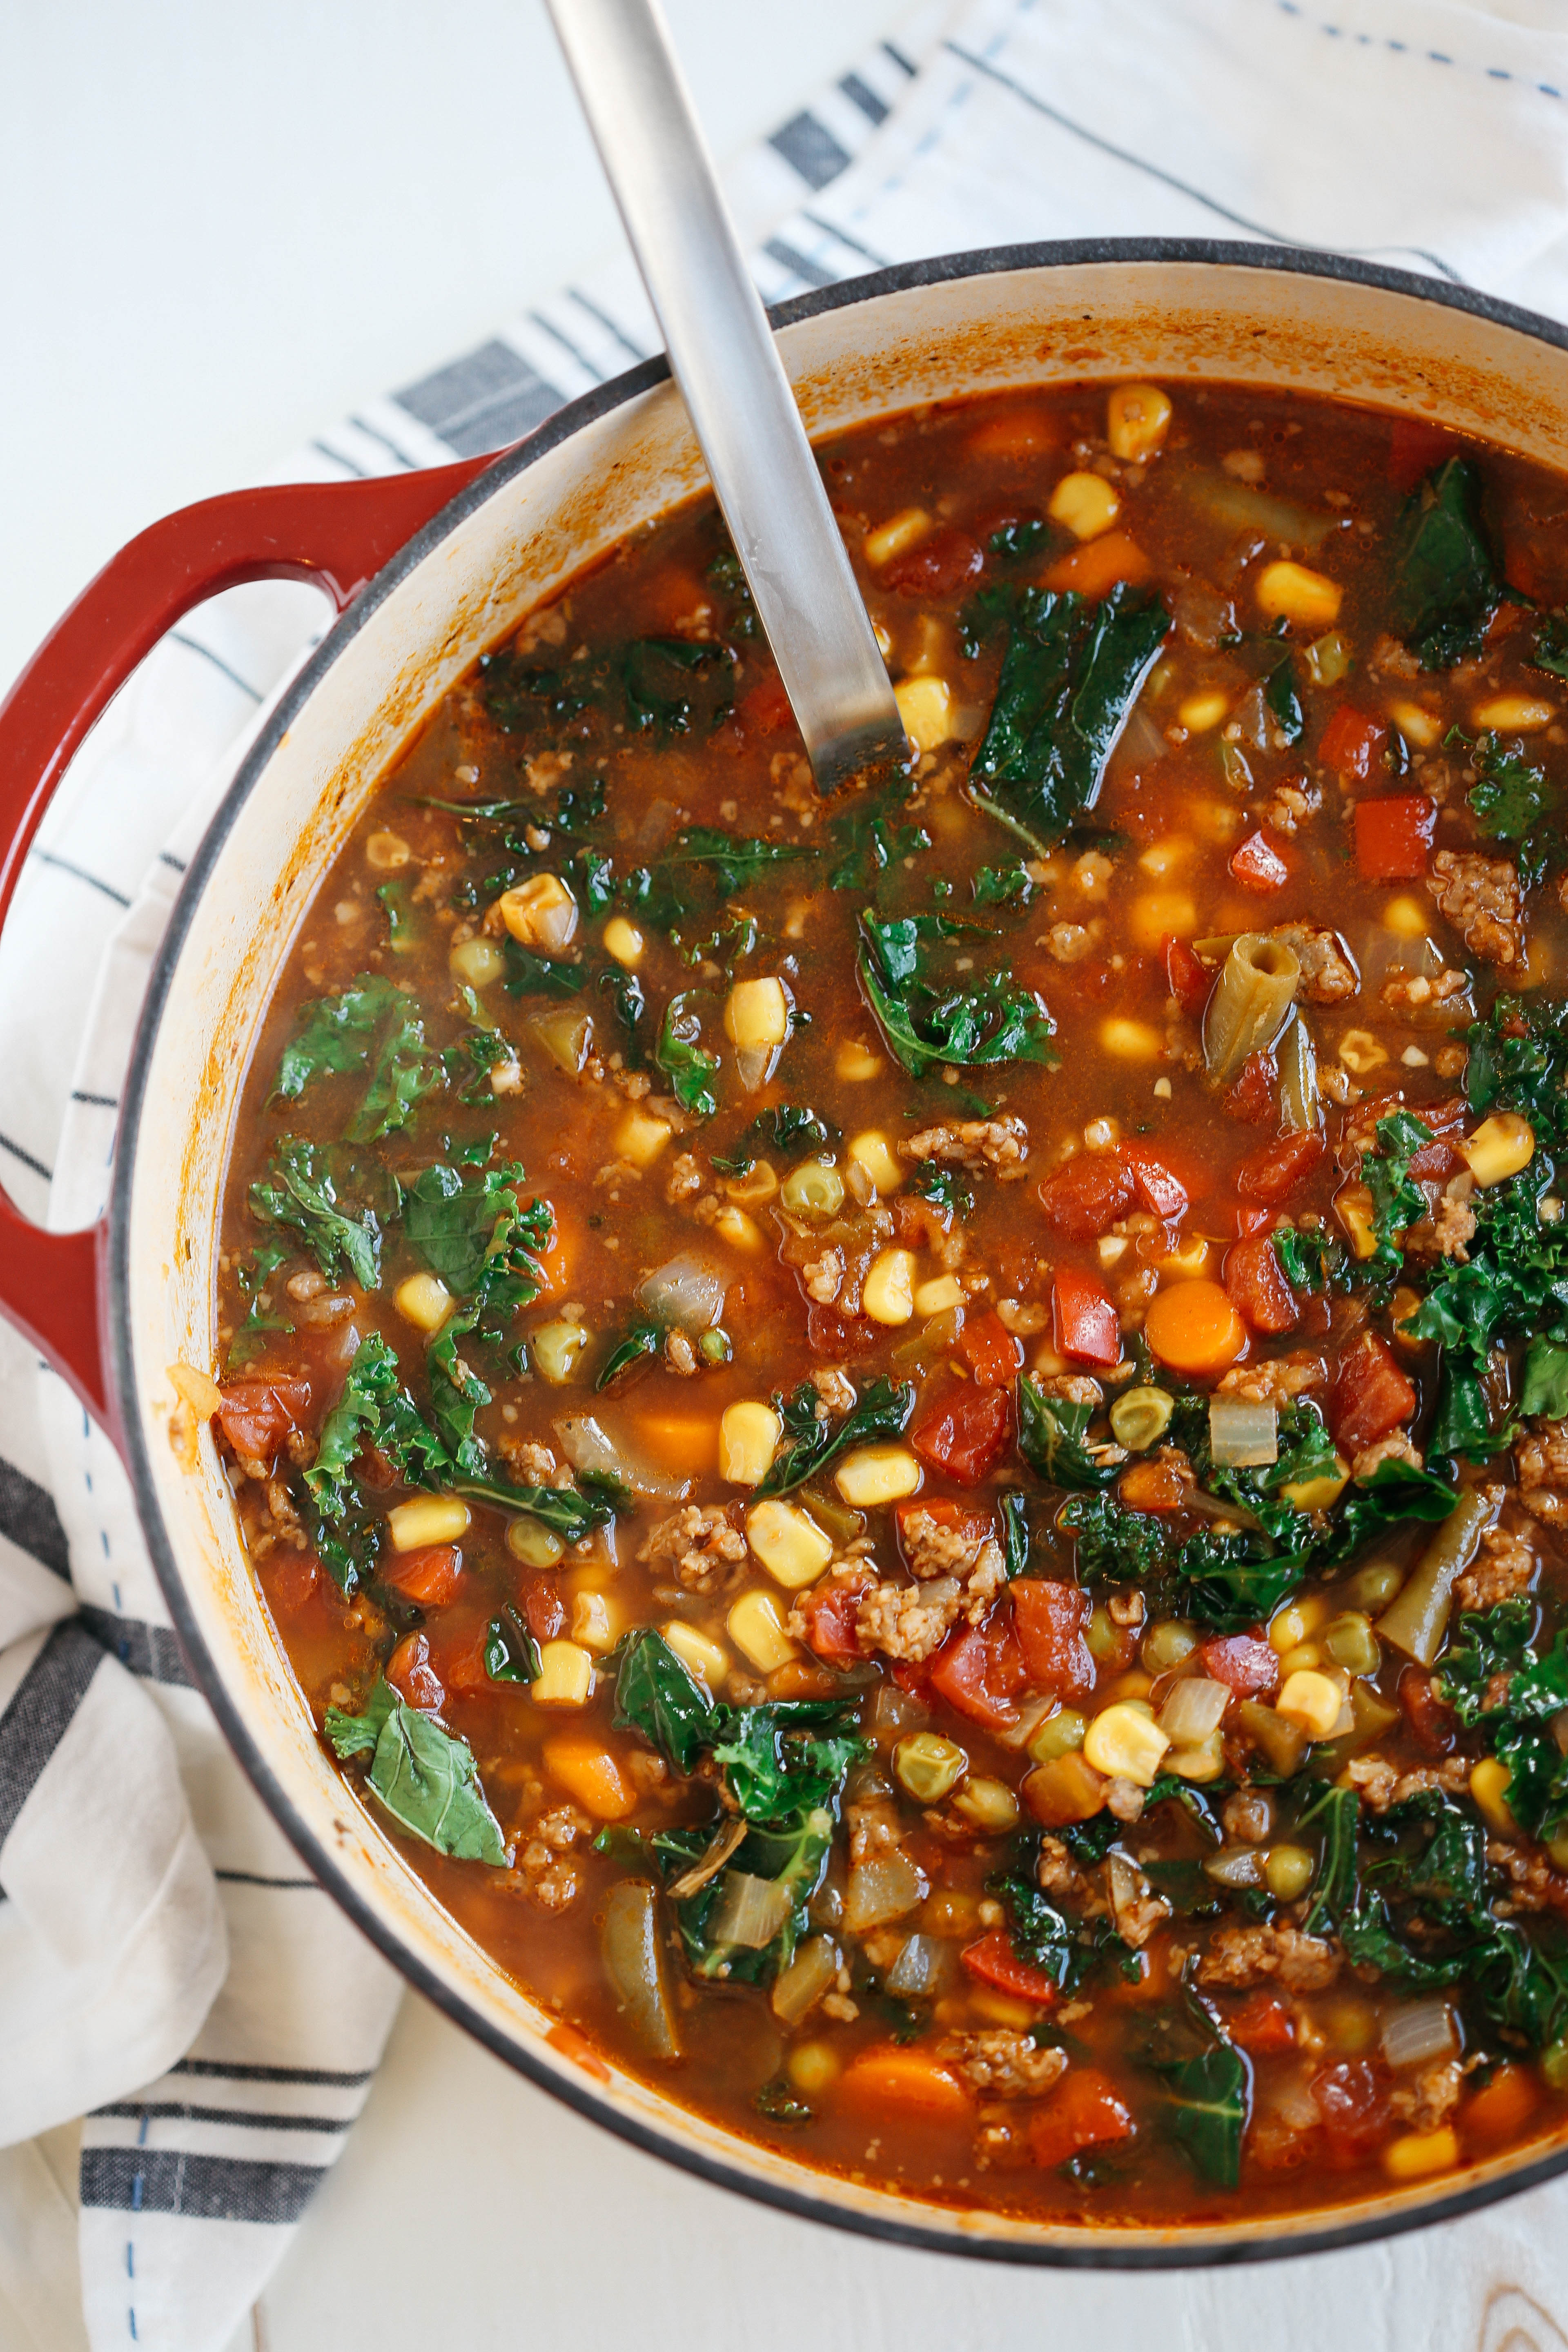 This One Pot Spicy Sausage and Kale Soup is hearty, delicious and literally takes just 5 minutes to throw together in a pot or slow cooker!